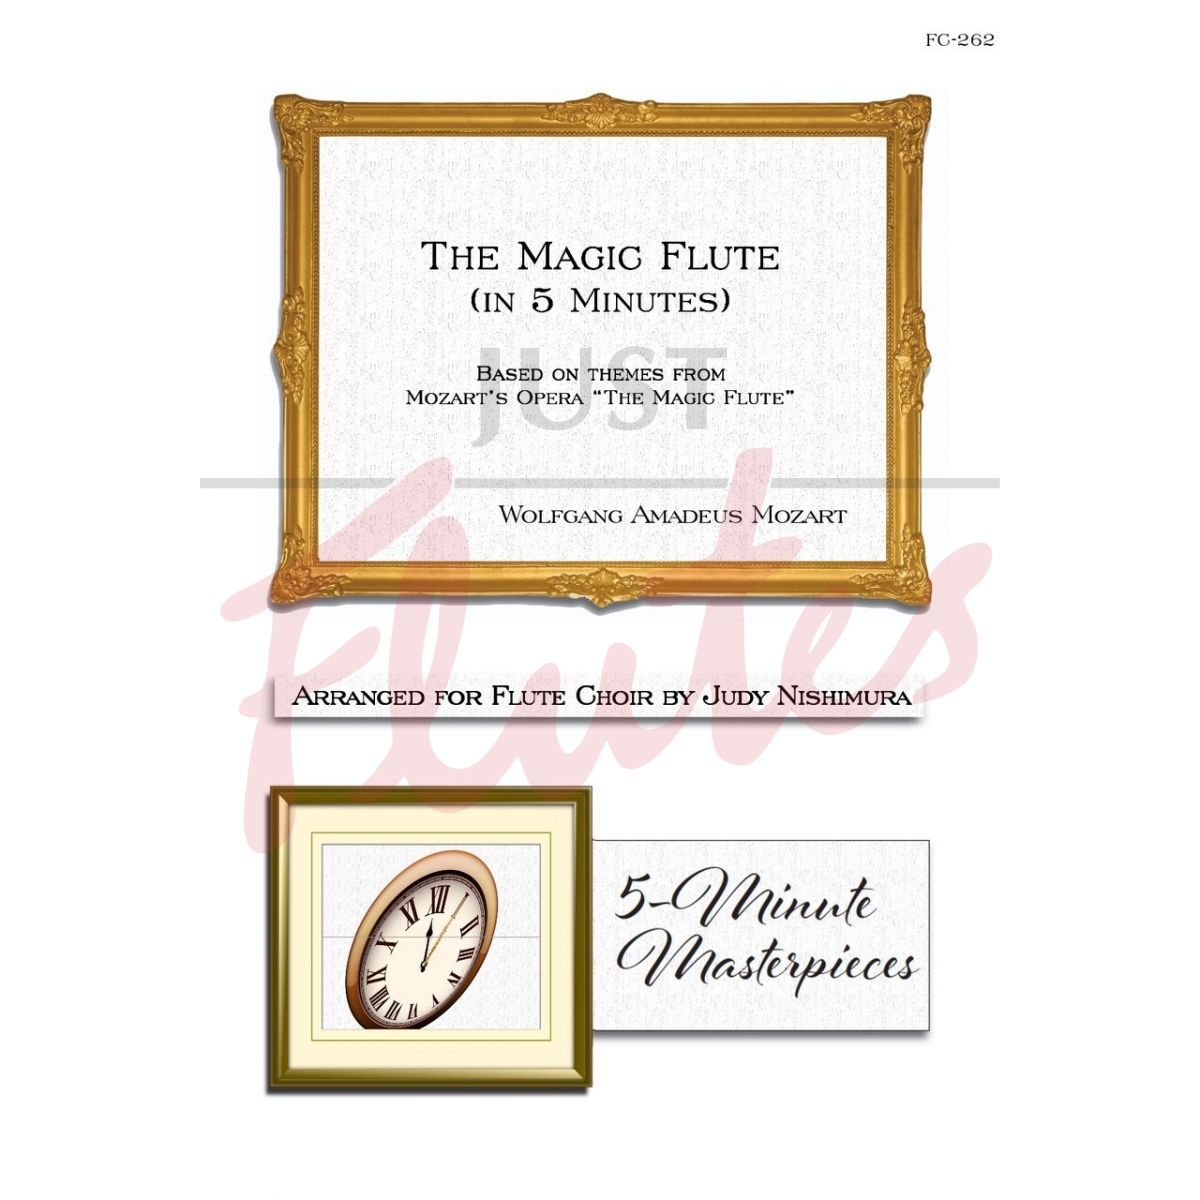 The Magic Flute (in 5 Minutes) for Flute Choir